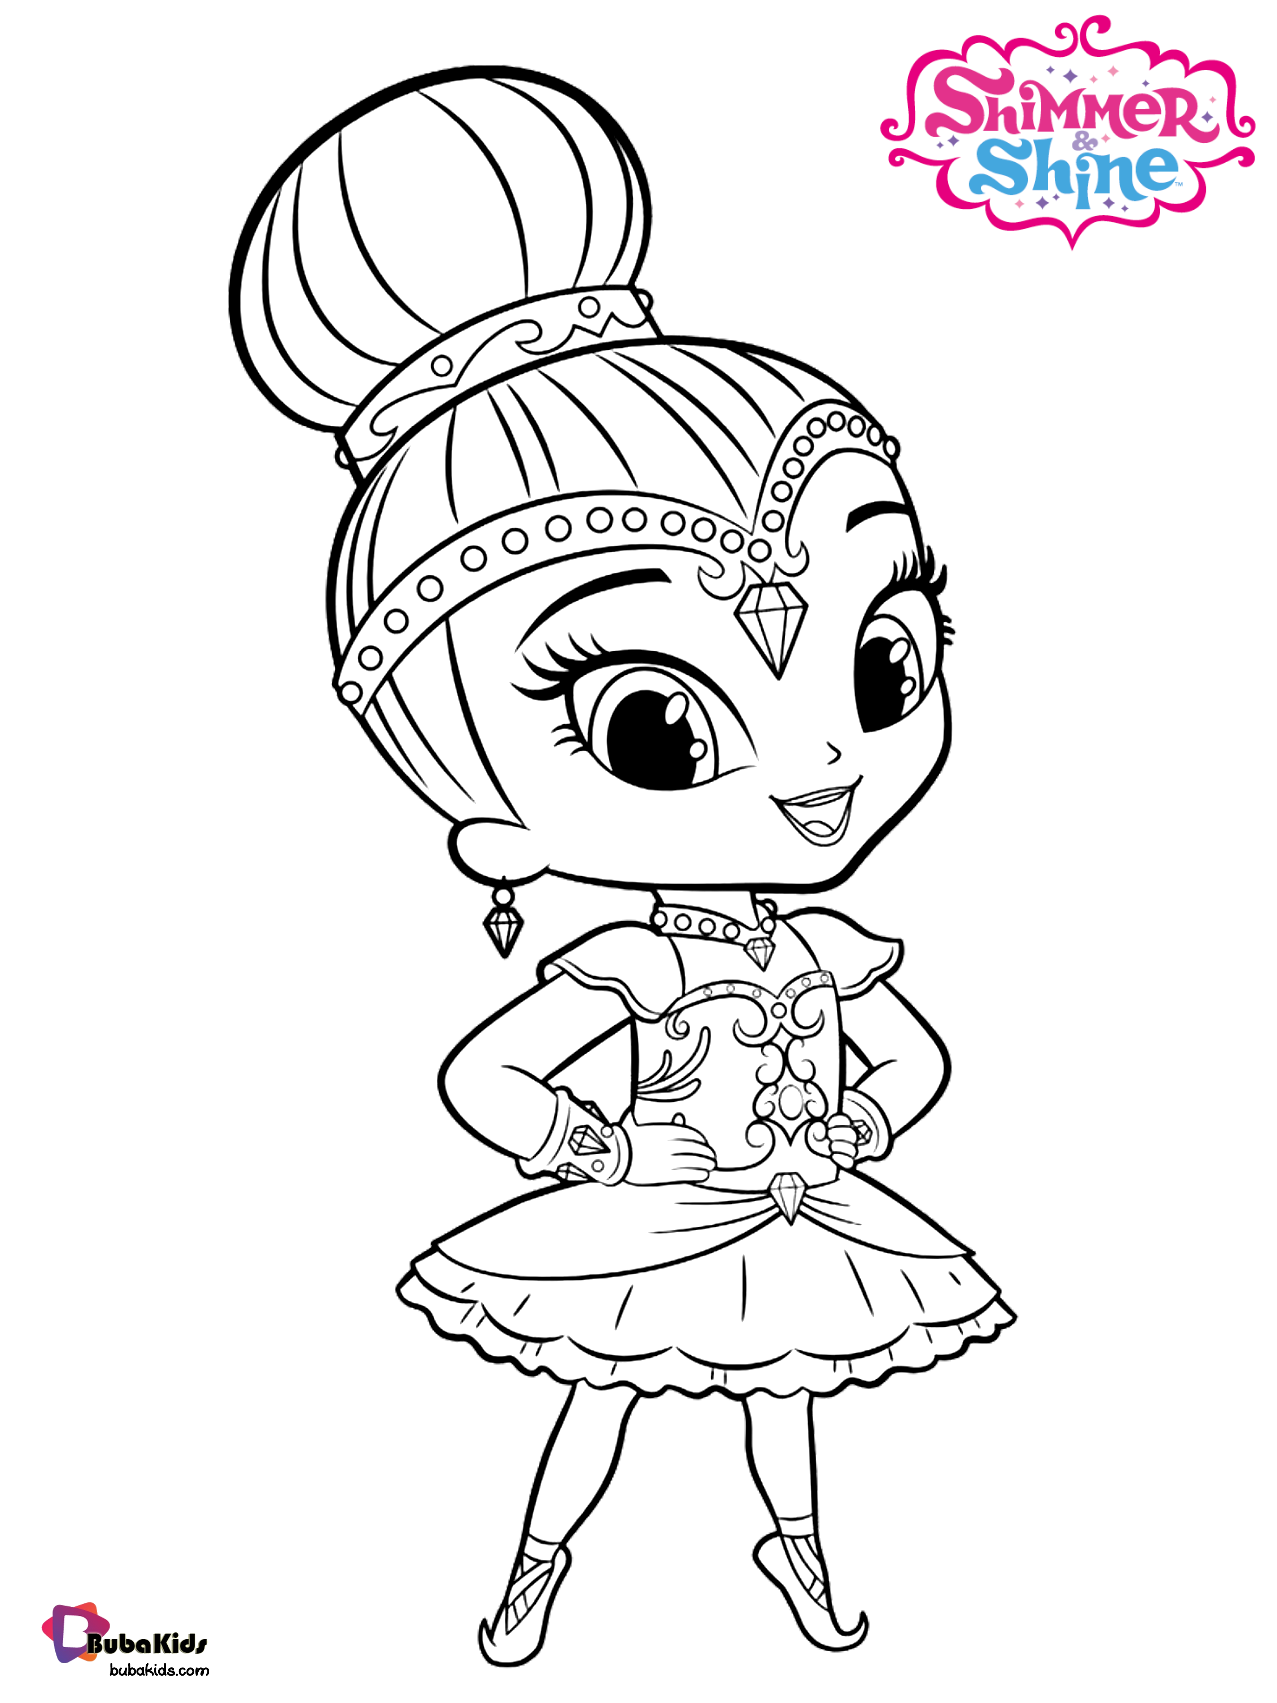 Free download to print Nick jr Shimmer and Shine coloring page Wallpaper